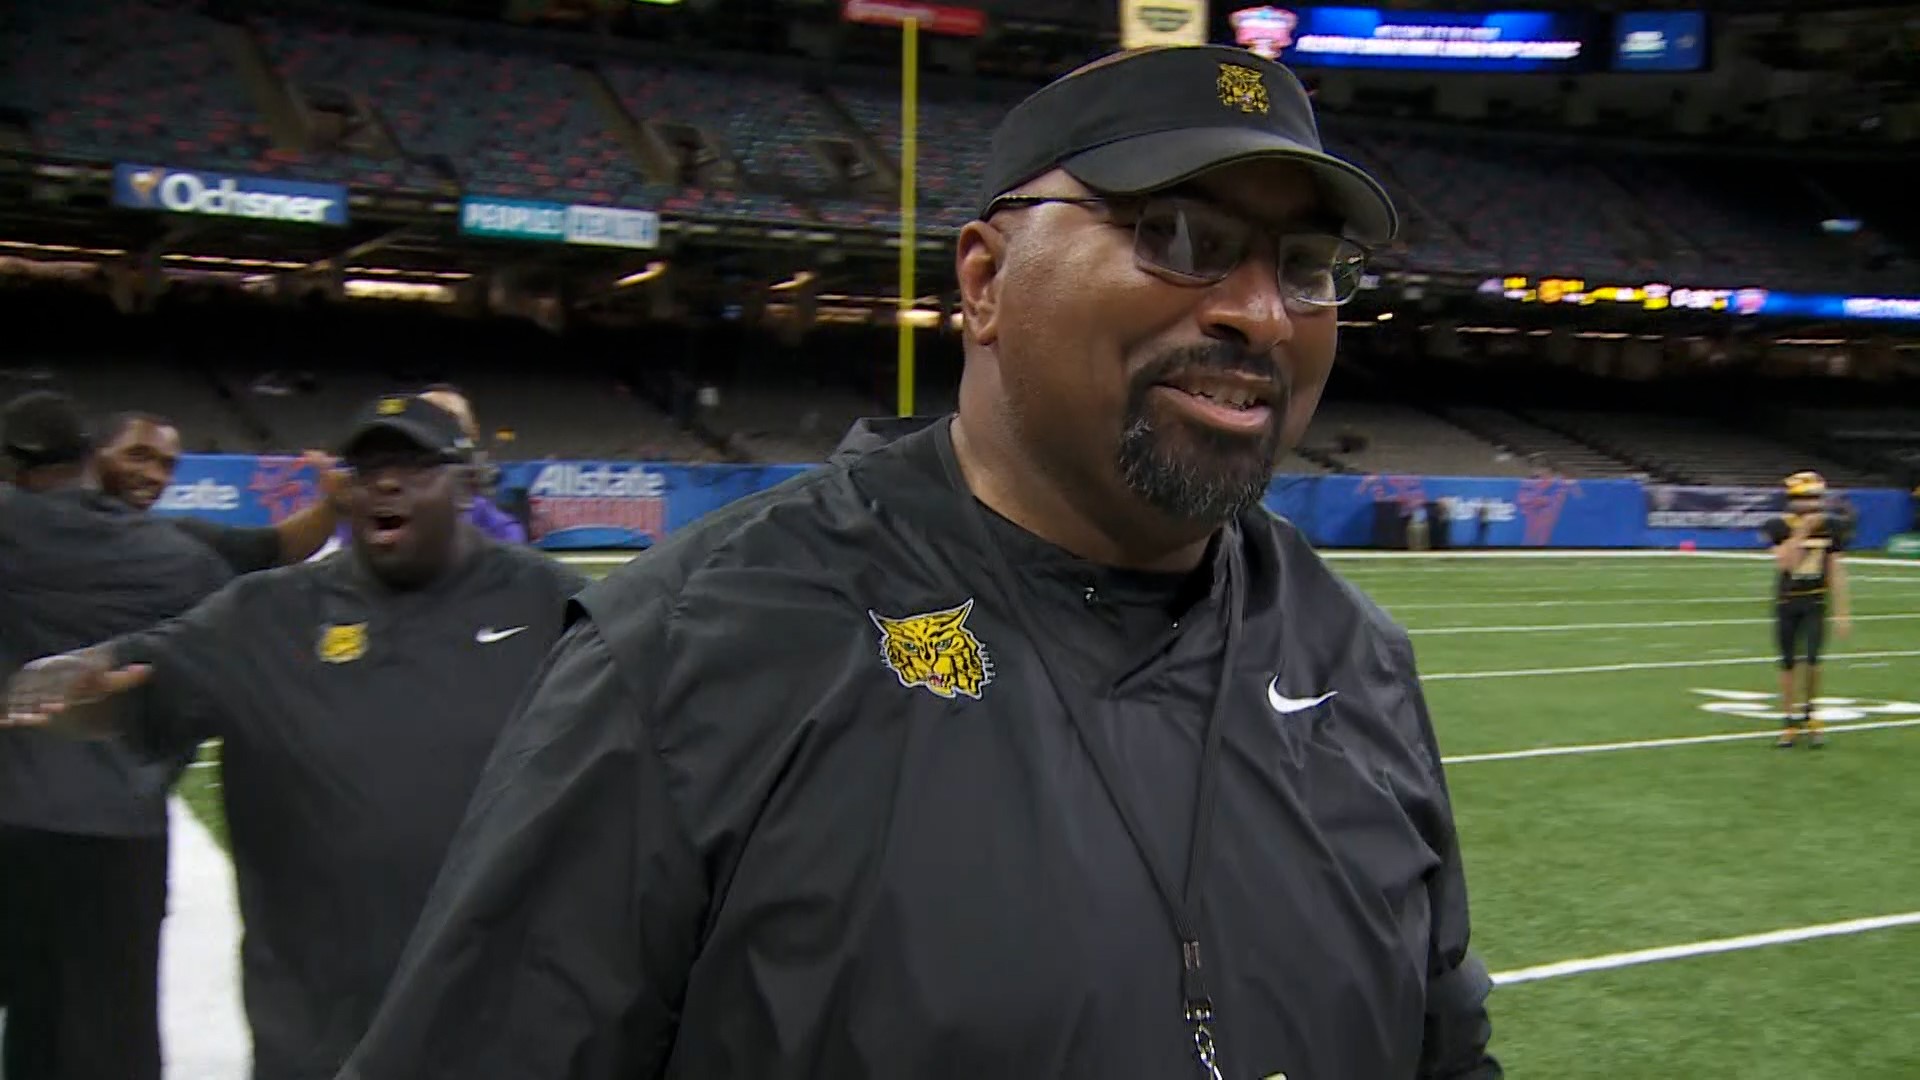 Coach Valdez spent last two seasons as an offensive line coach at Grambling State.